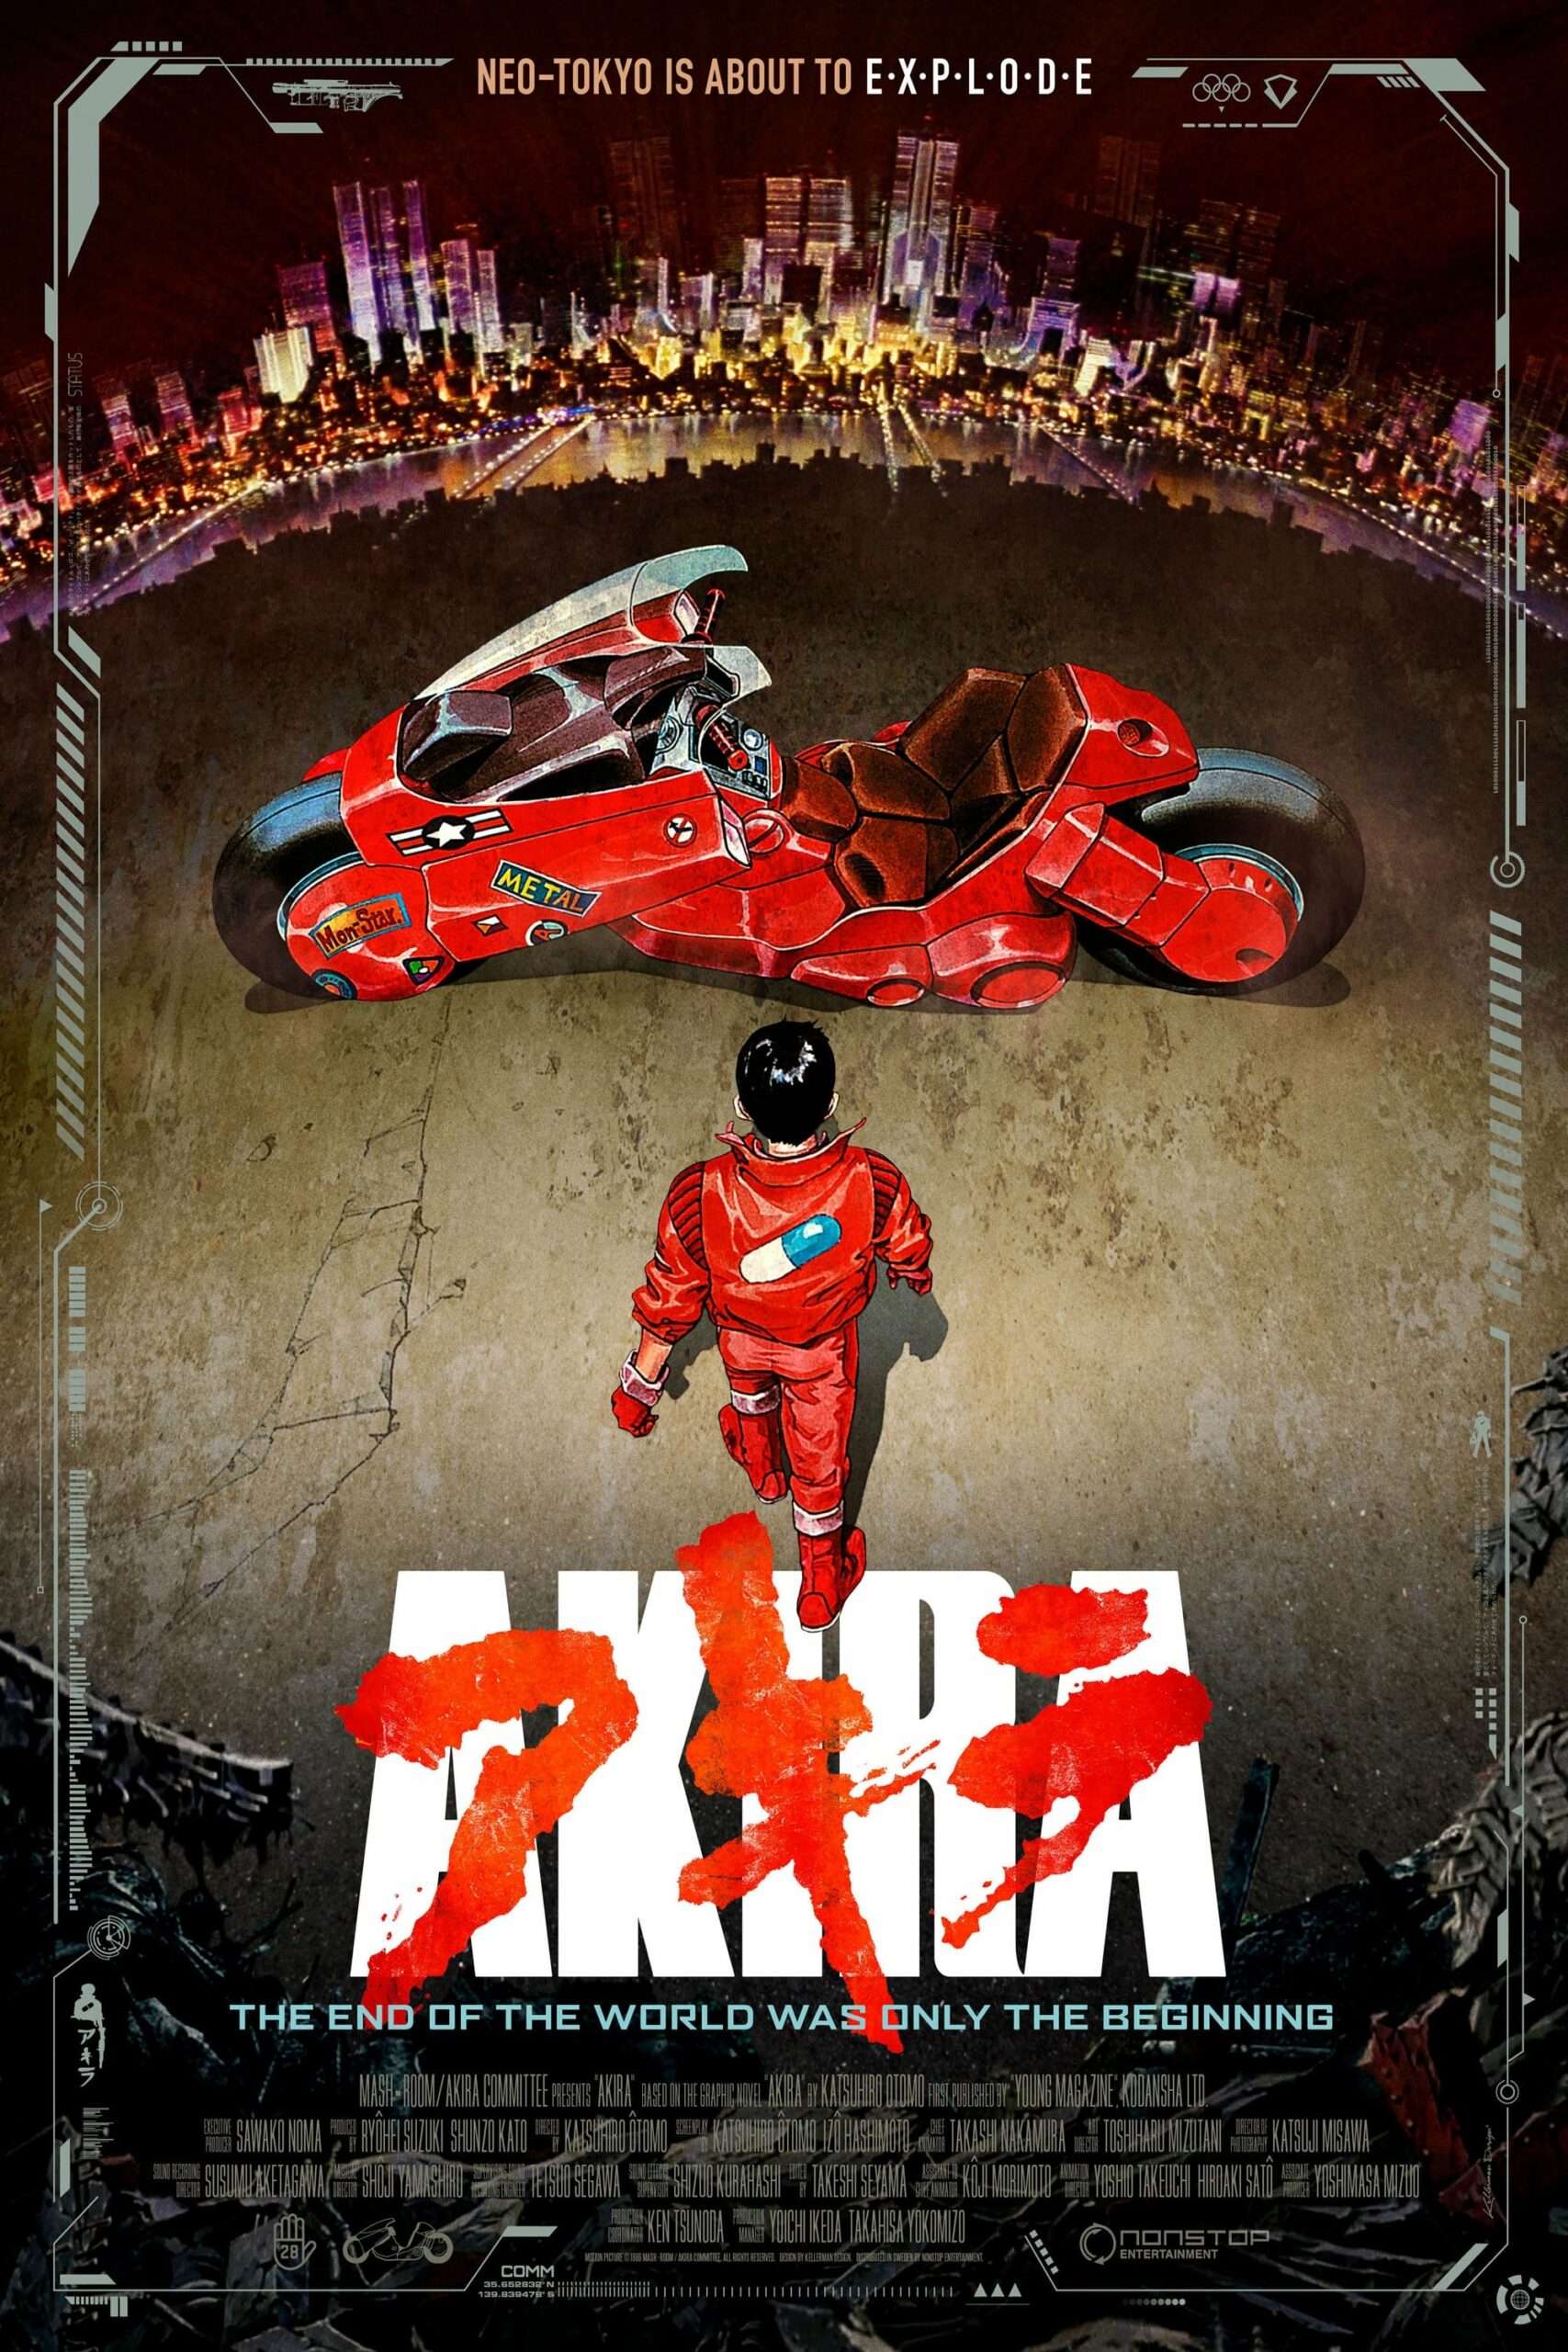 Akira: A Closer Look At The Phenomenon And Uncovering The Identity Of This Intriguing Figure